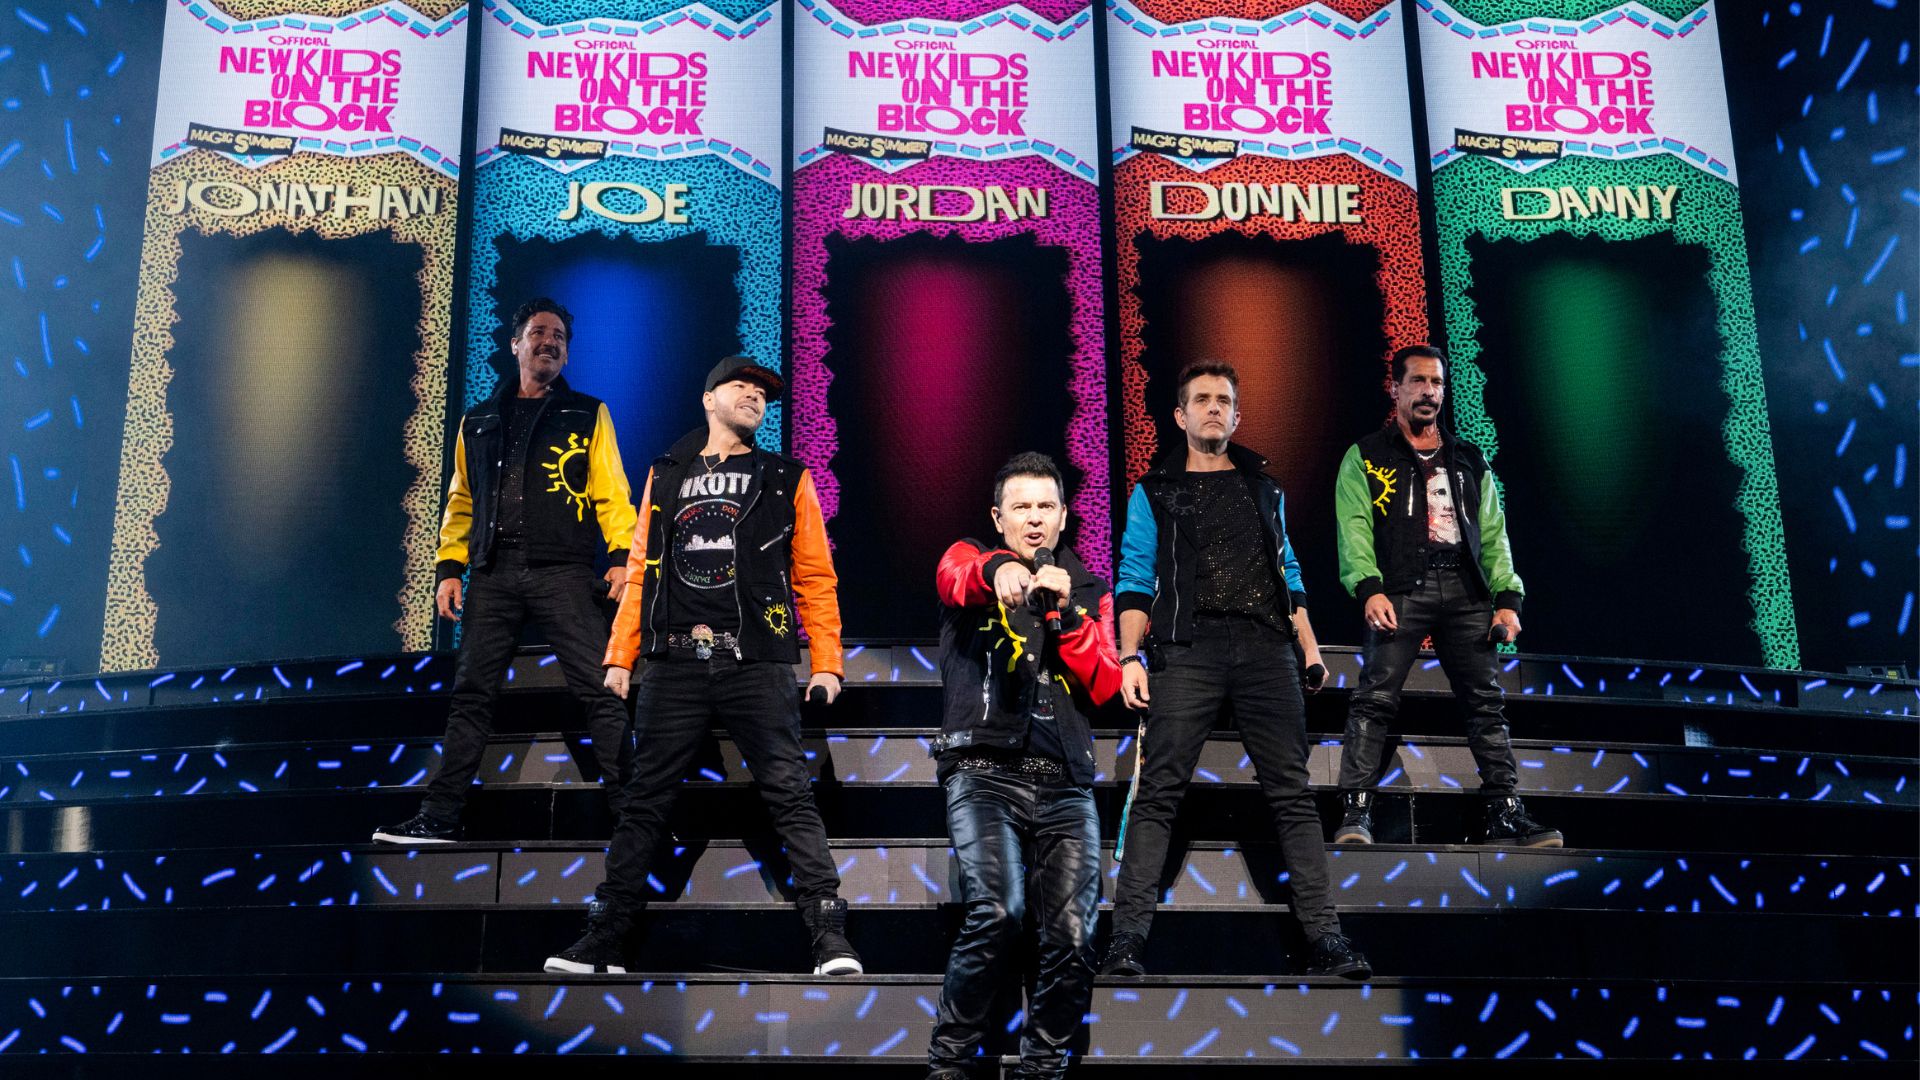 New Kids On The Block make a stop at Acrisure Arena on July 6